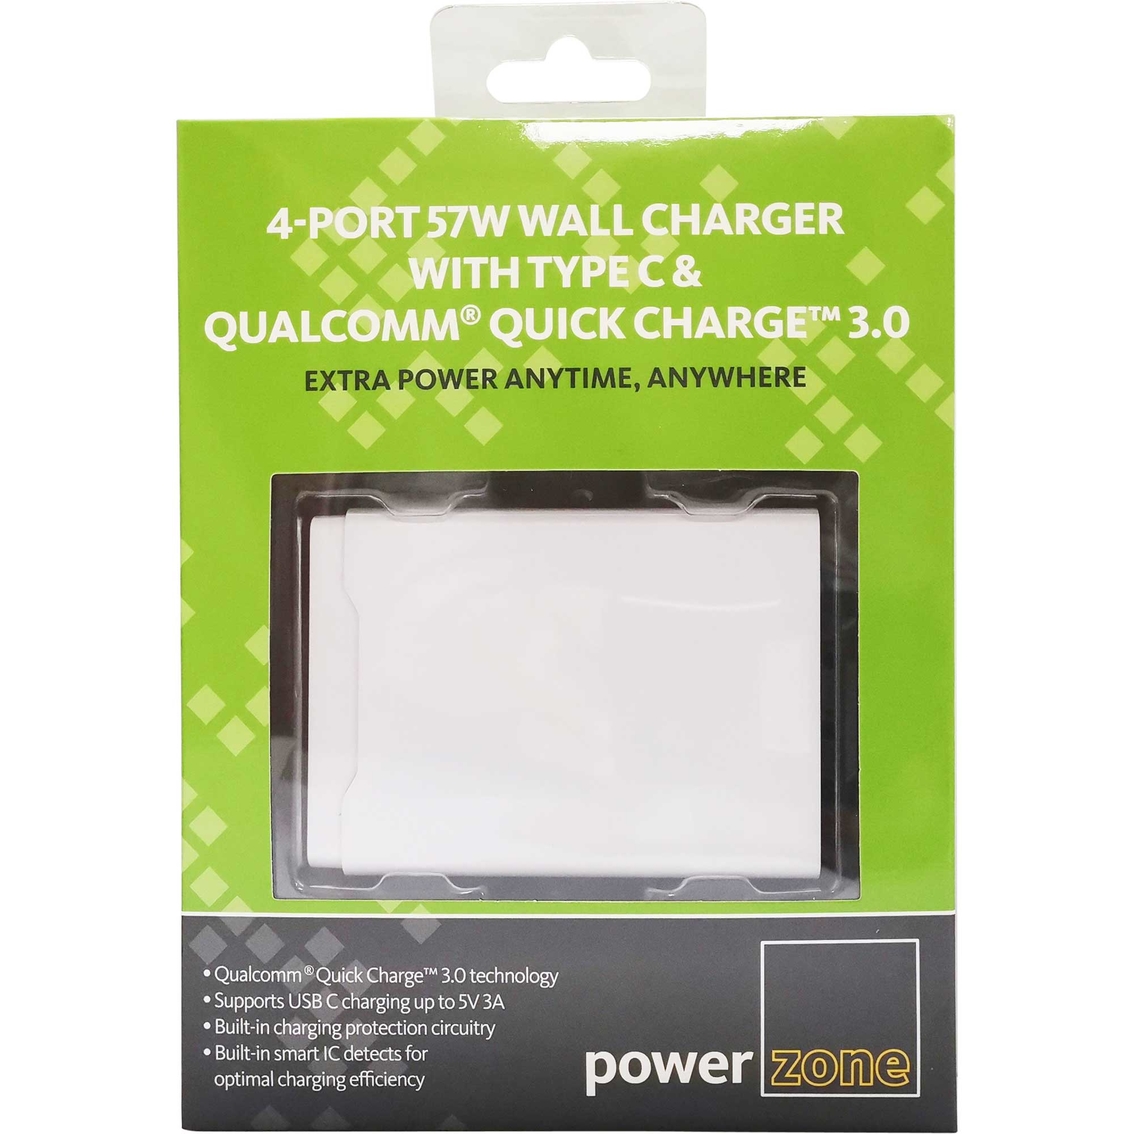 Powerzone 4 Port 57W Wall Charger with Type C & Qualcomm Quick Charge 3.0 - Image 3 of 4